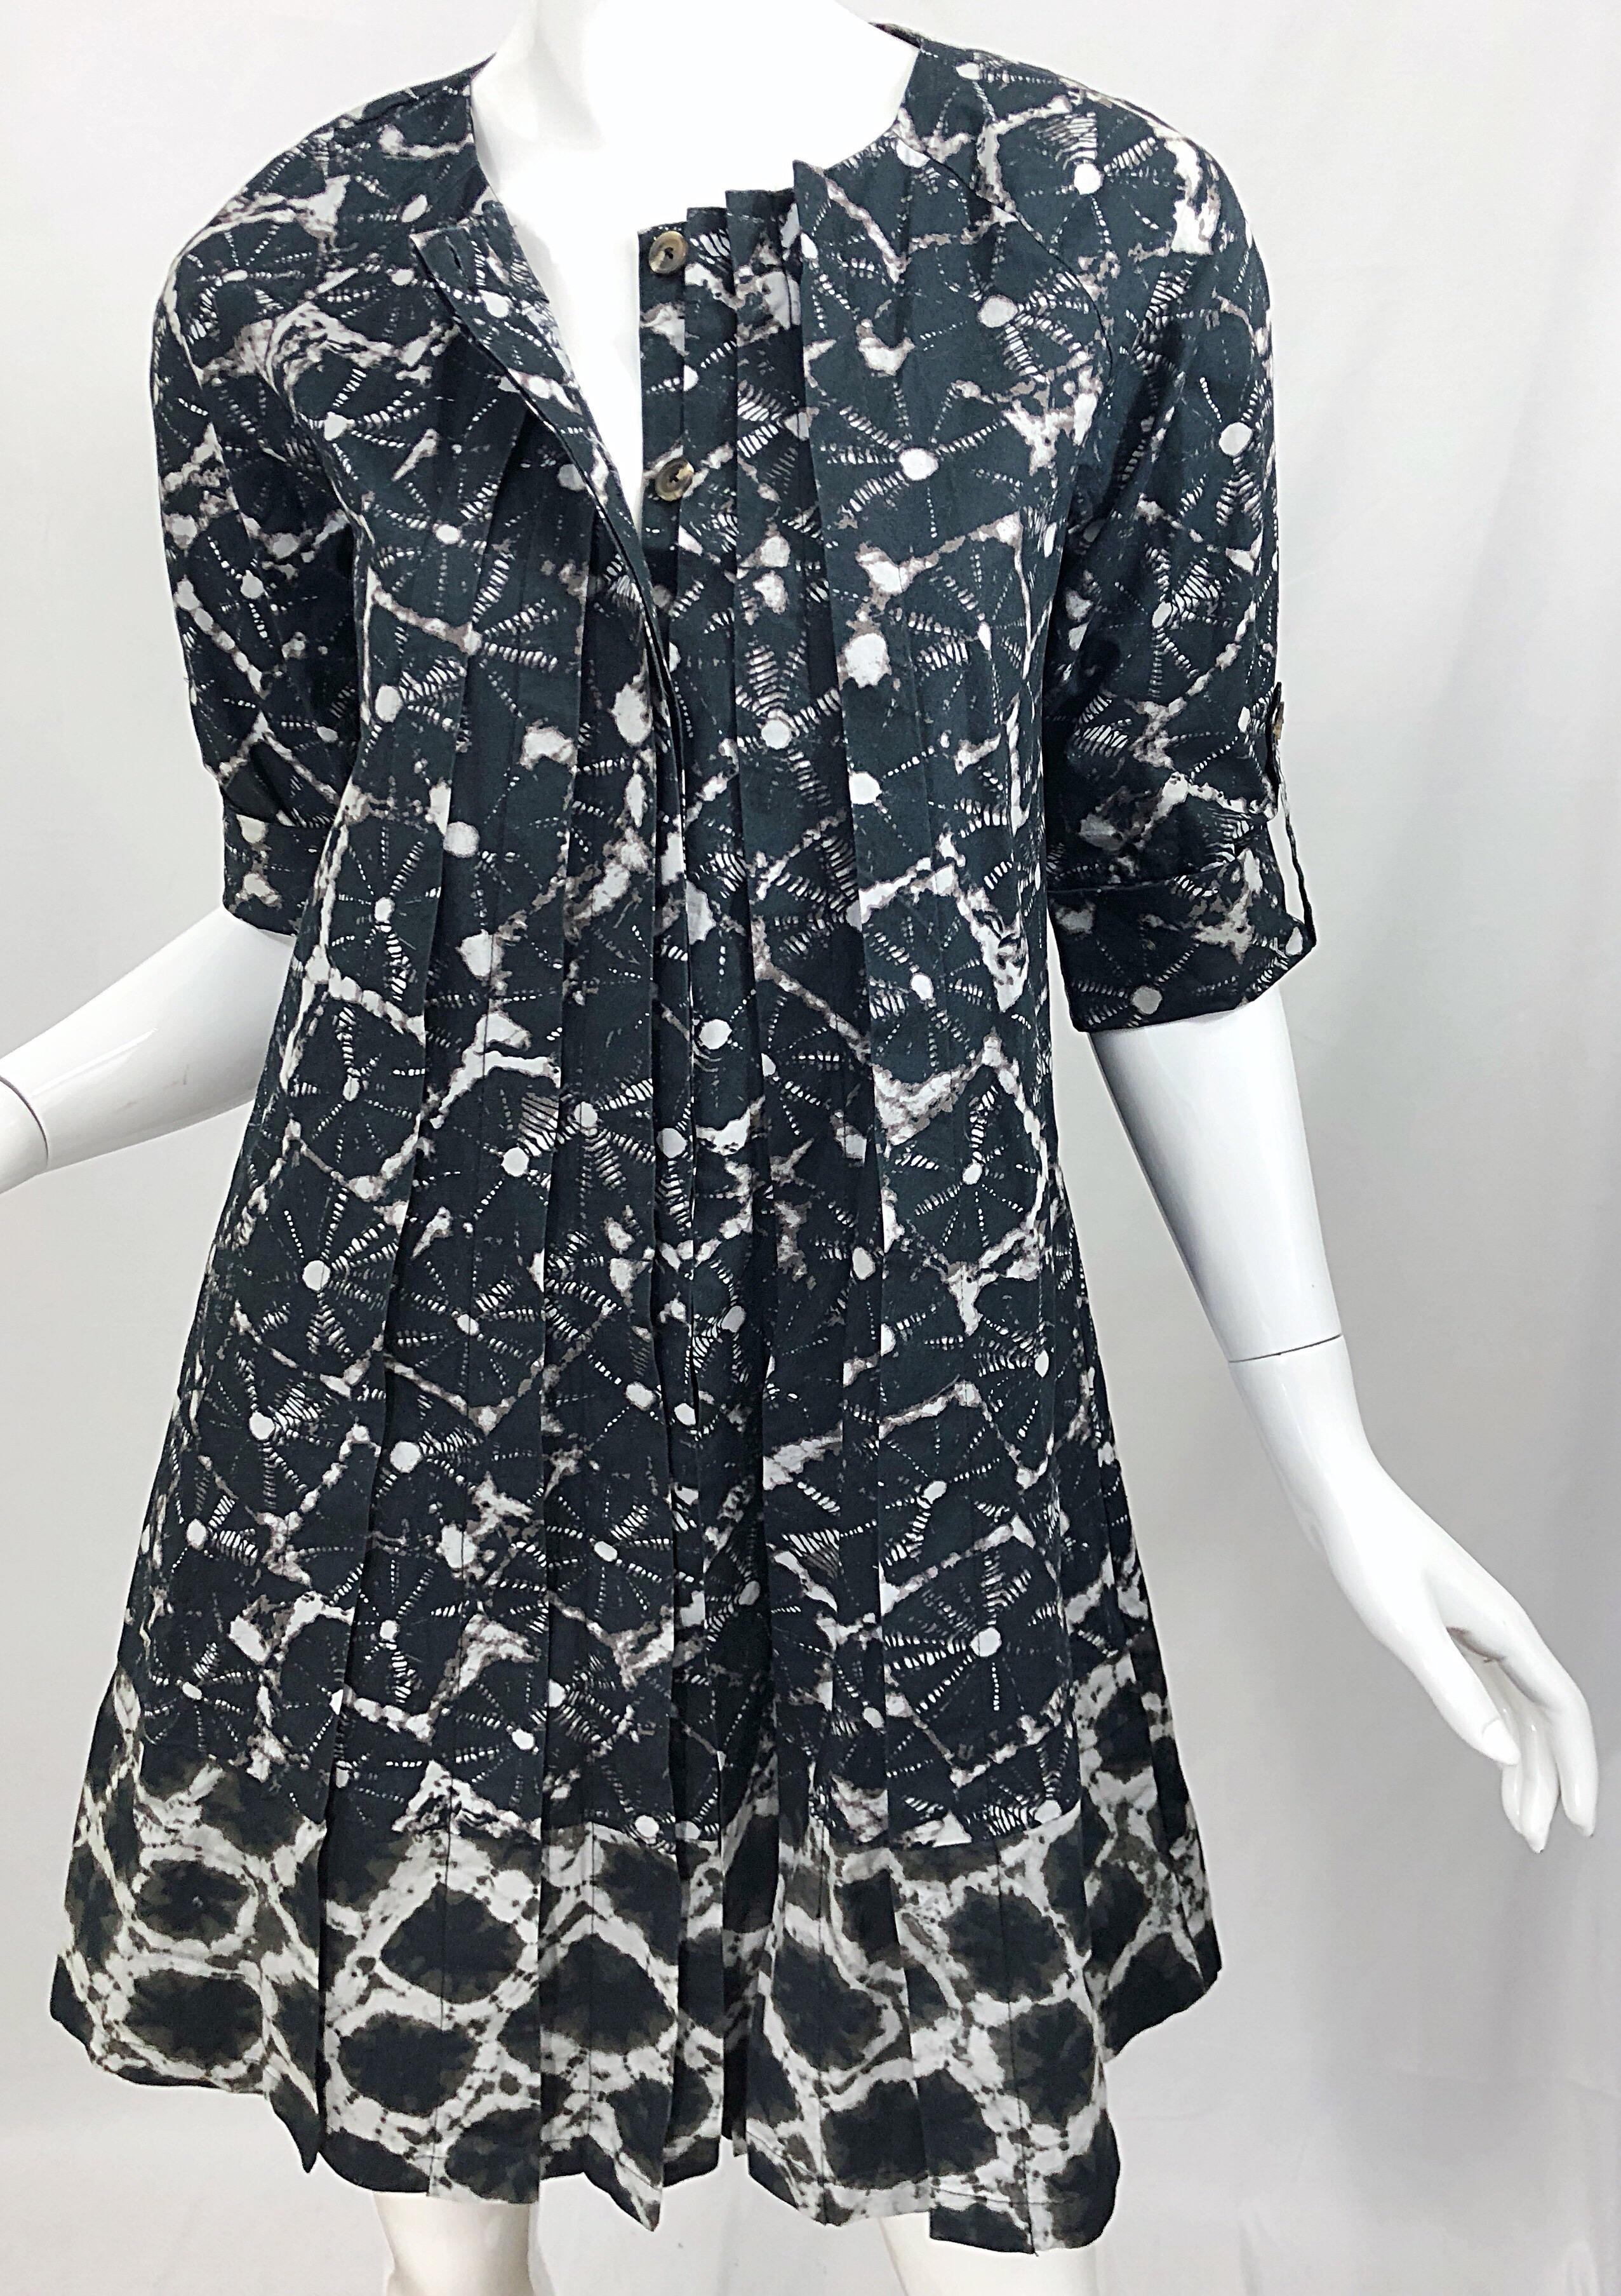 Thakoon Spring 2008 Black White Abstract Tie Dye Trapeze Swing Dress Jacket For Sale 2